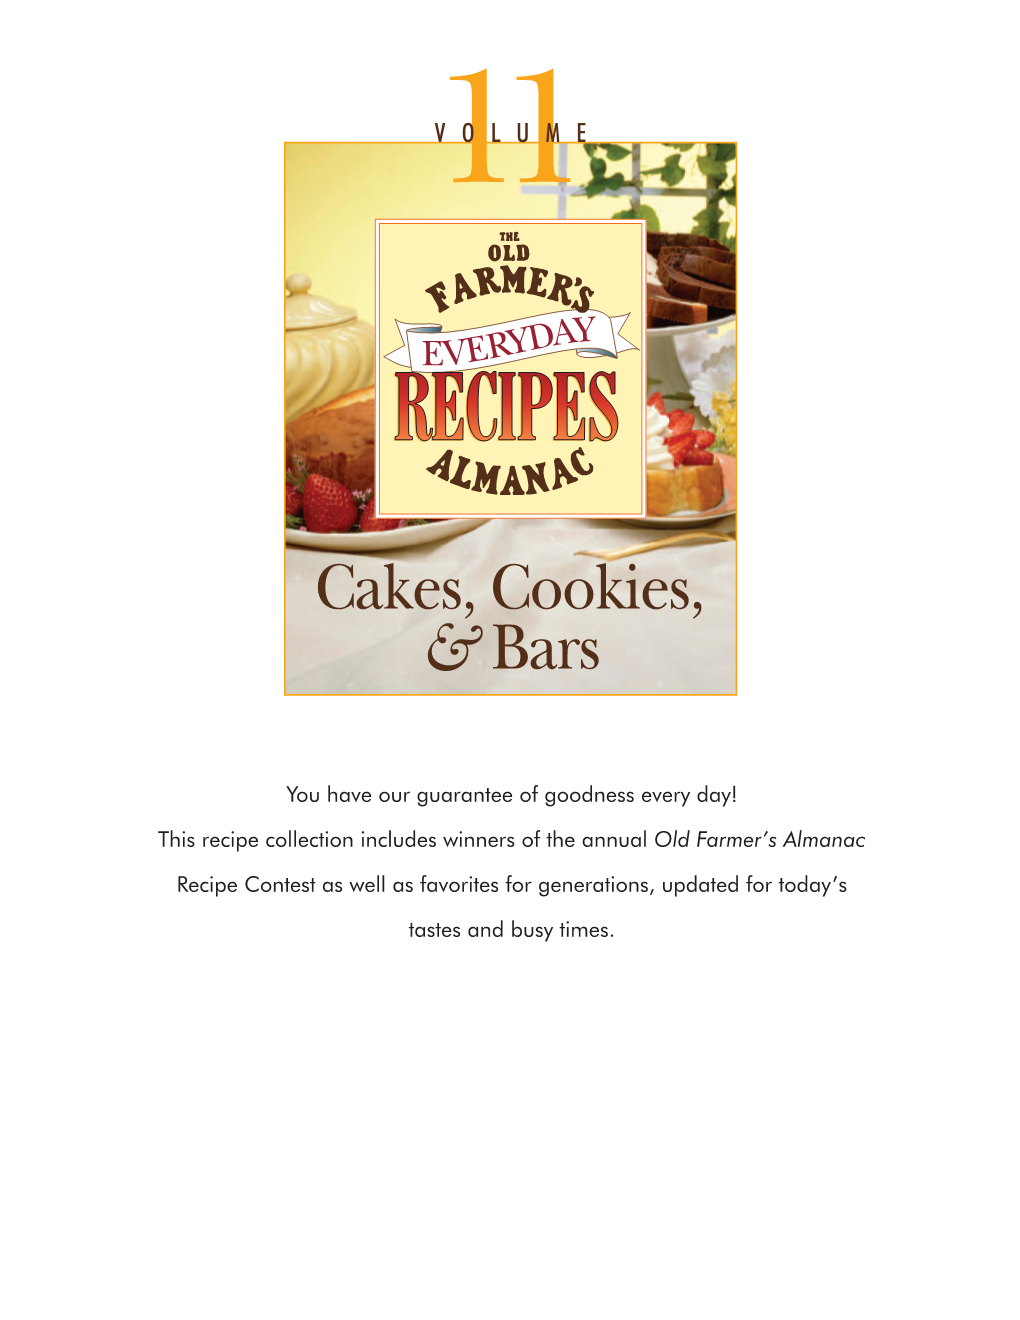 To Download Everyday Recipes: Cakes, Cookies & Bars